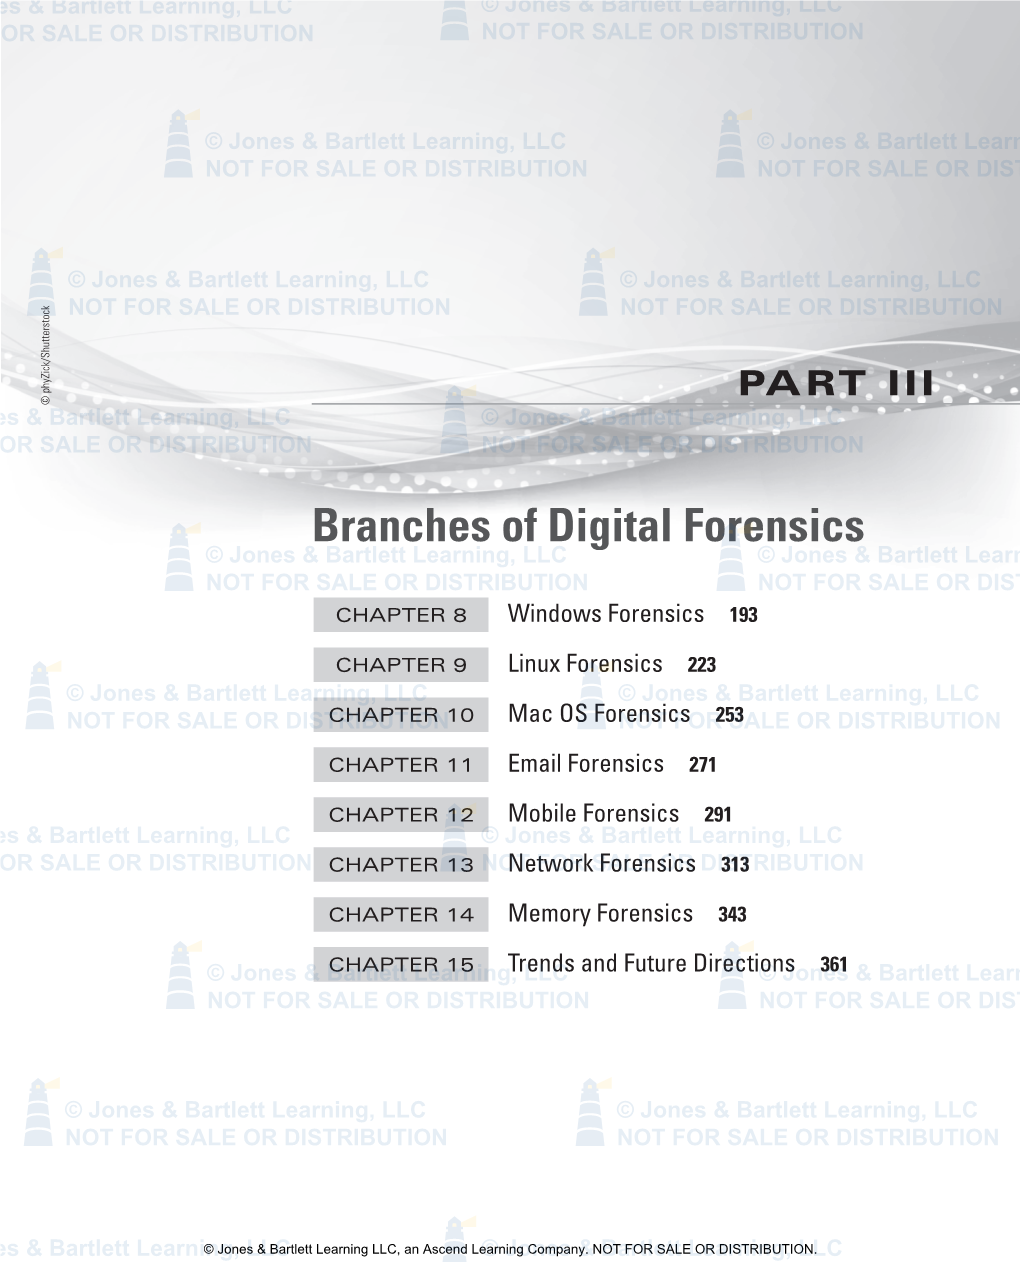 Branches of Digital Forensics